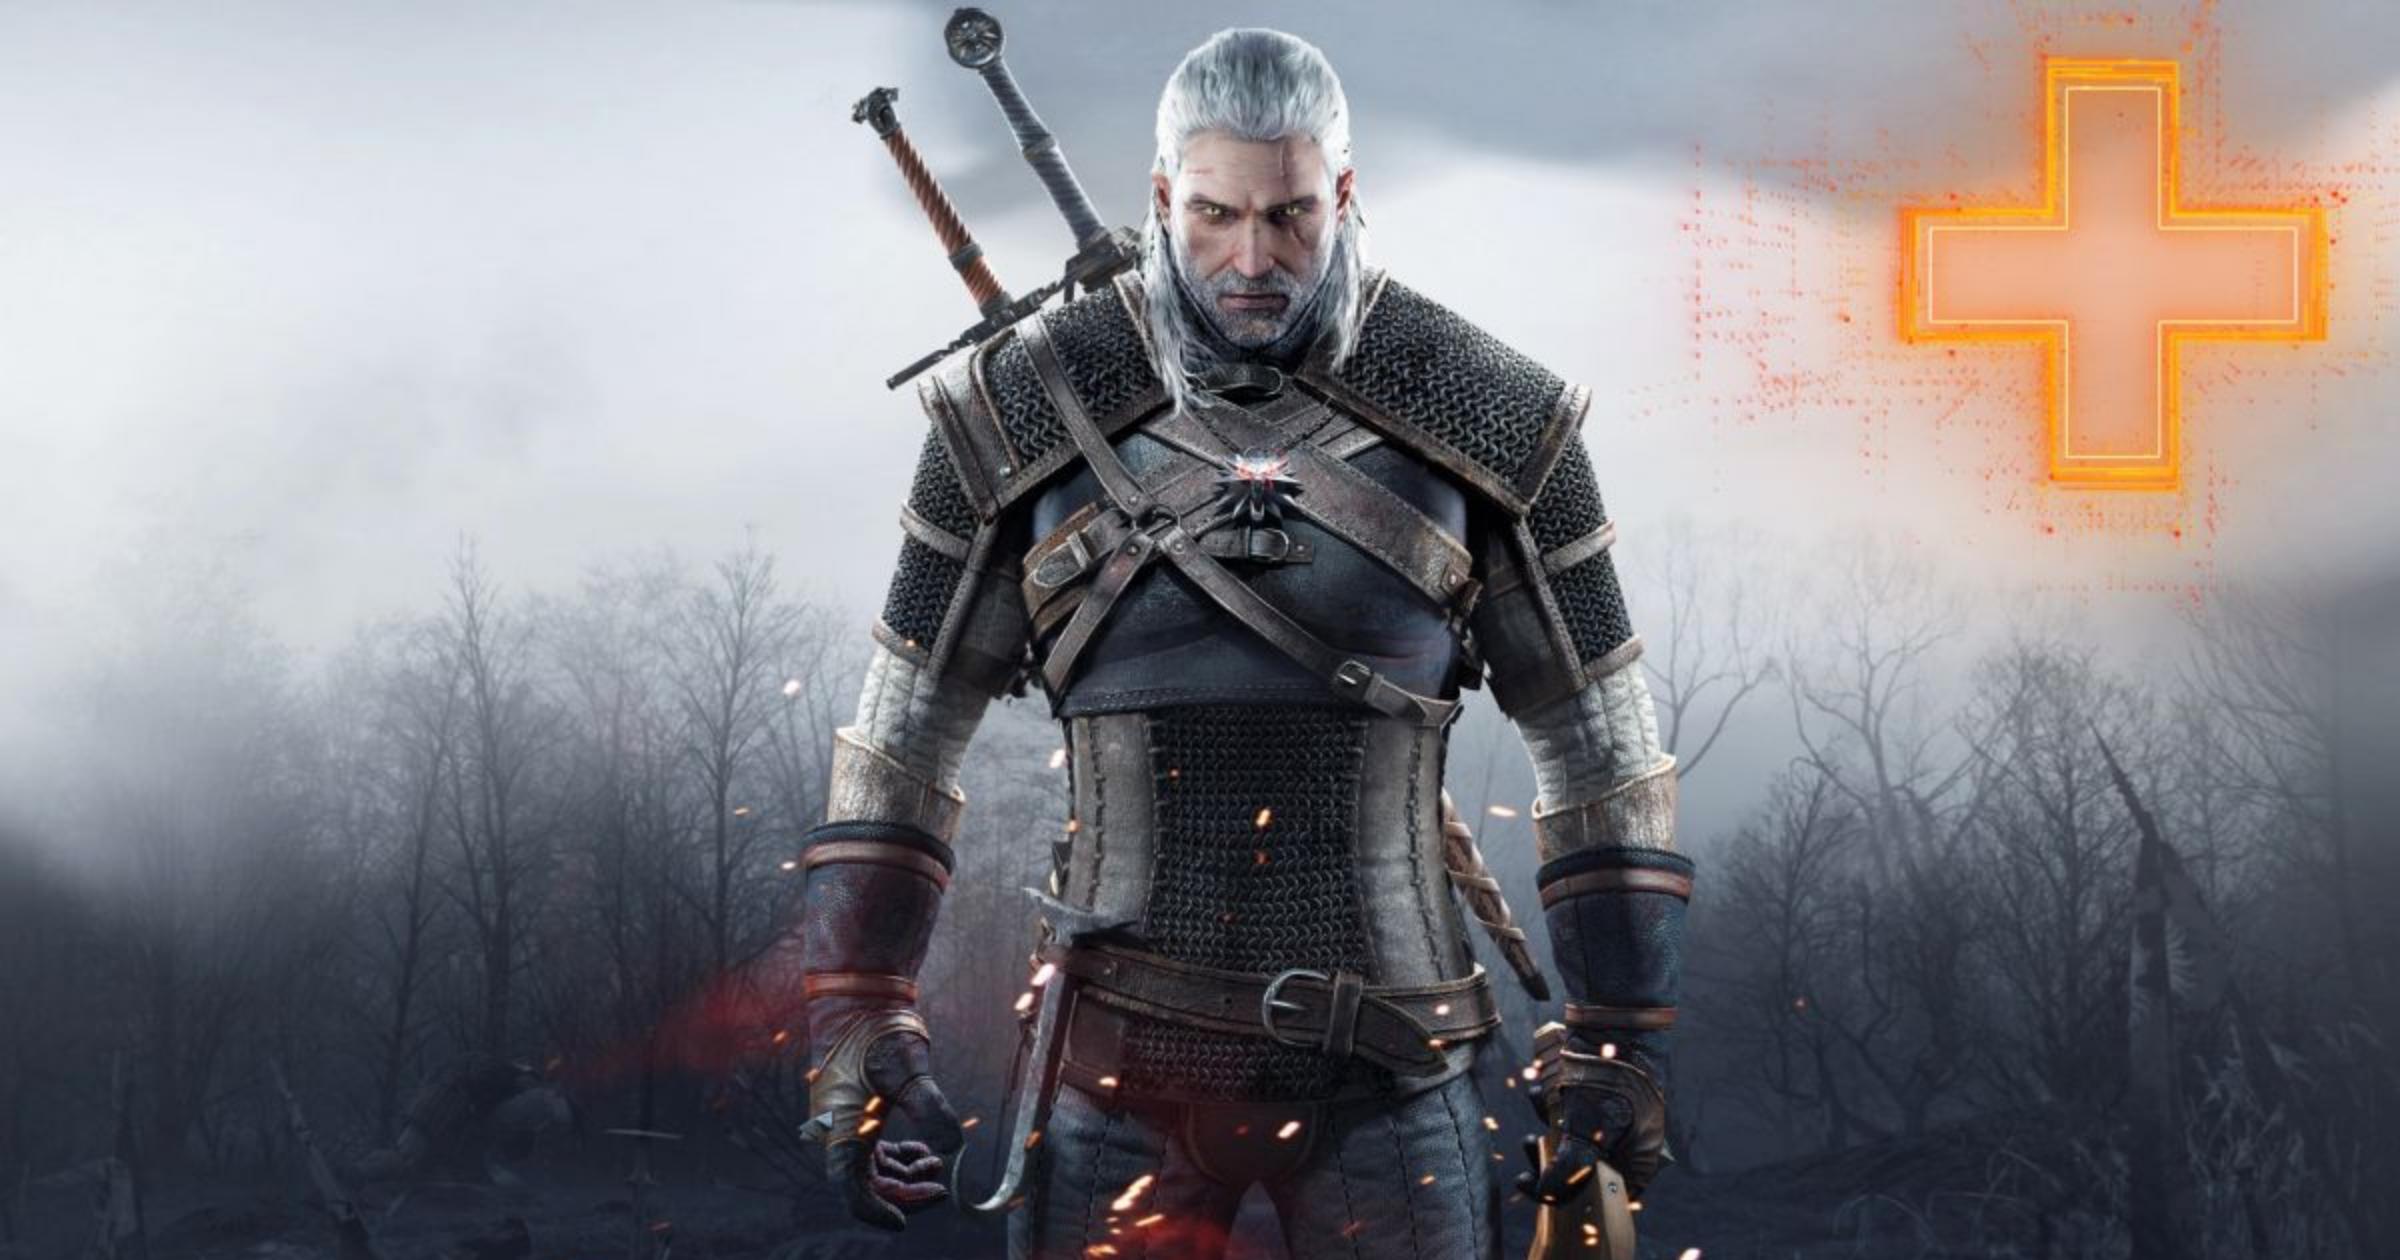 Best Similar Games To The Witcher 3